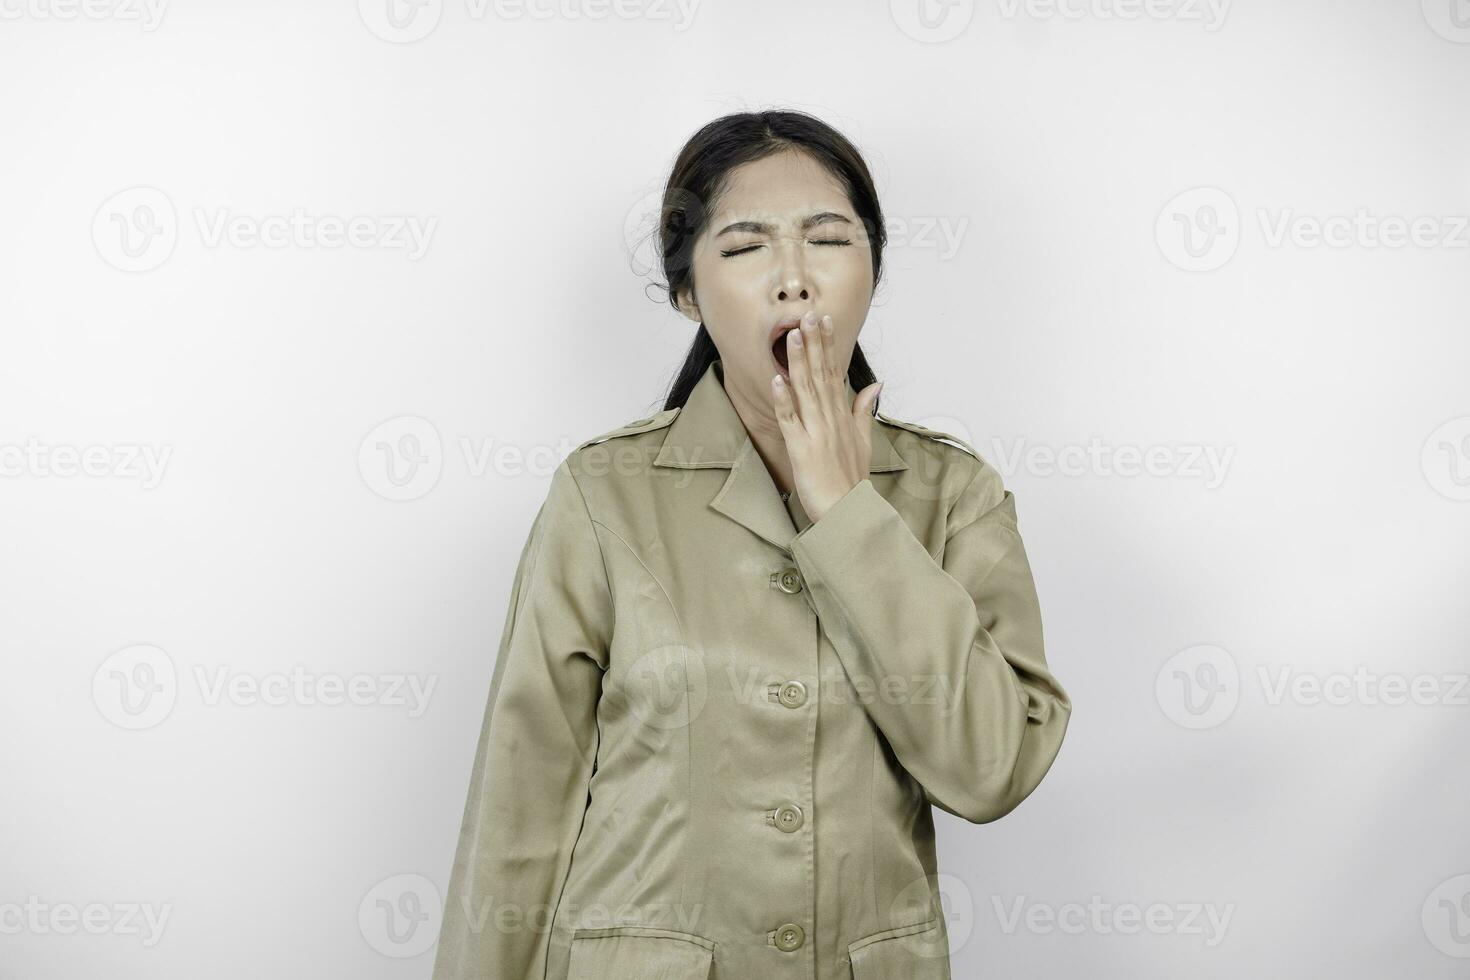 Portrait of sleepy Asian woman wearing a brown uniform and covering her mouth with a hand while yawning. Isolated image on white background photo